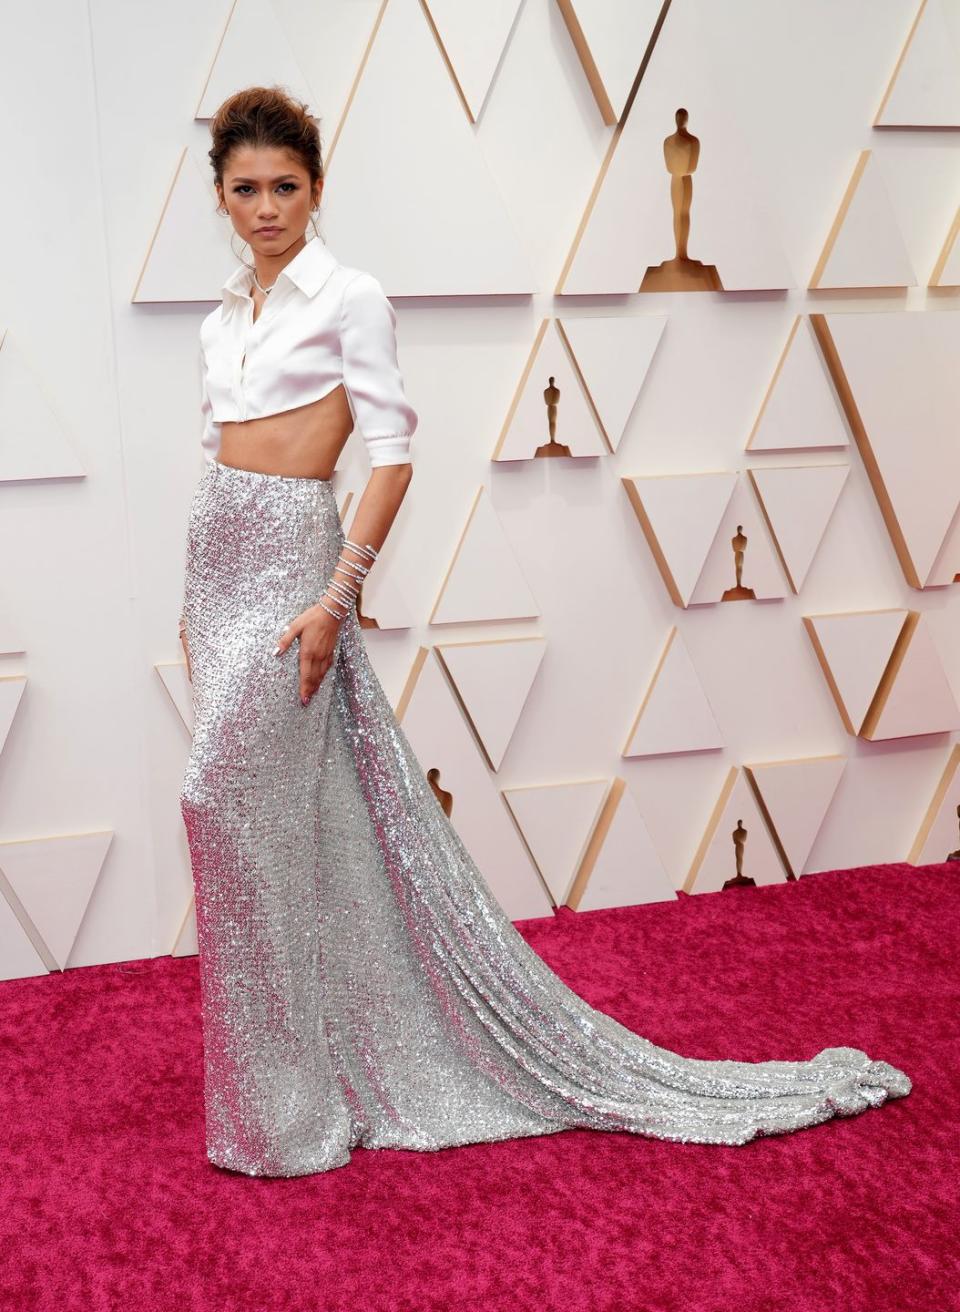 hollywood, california march 27 zendaya attends the 94th annual academy awards at hollywood and highland on march 27, 2022 in hollywood, california photo by kevin mazurwireimage